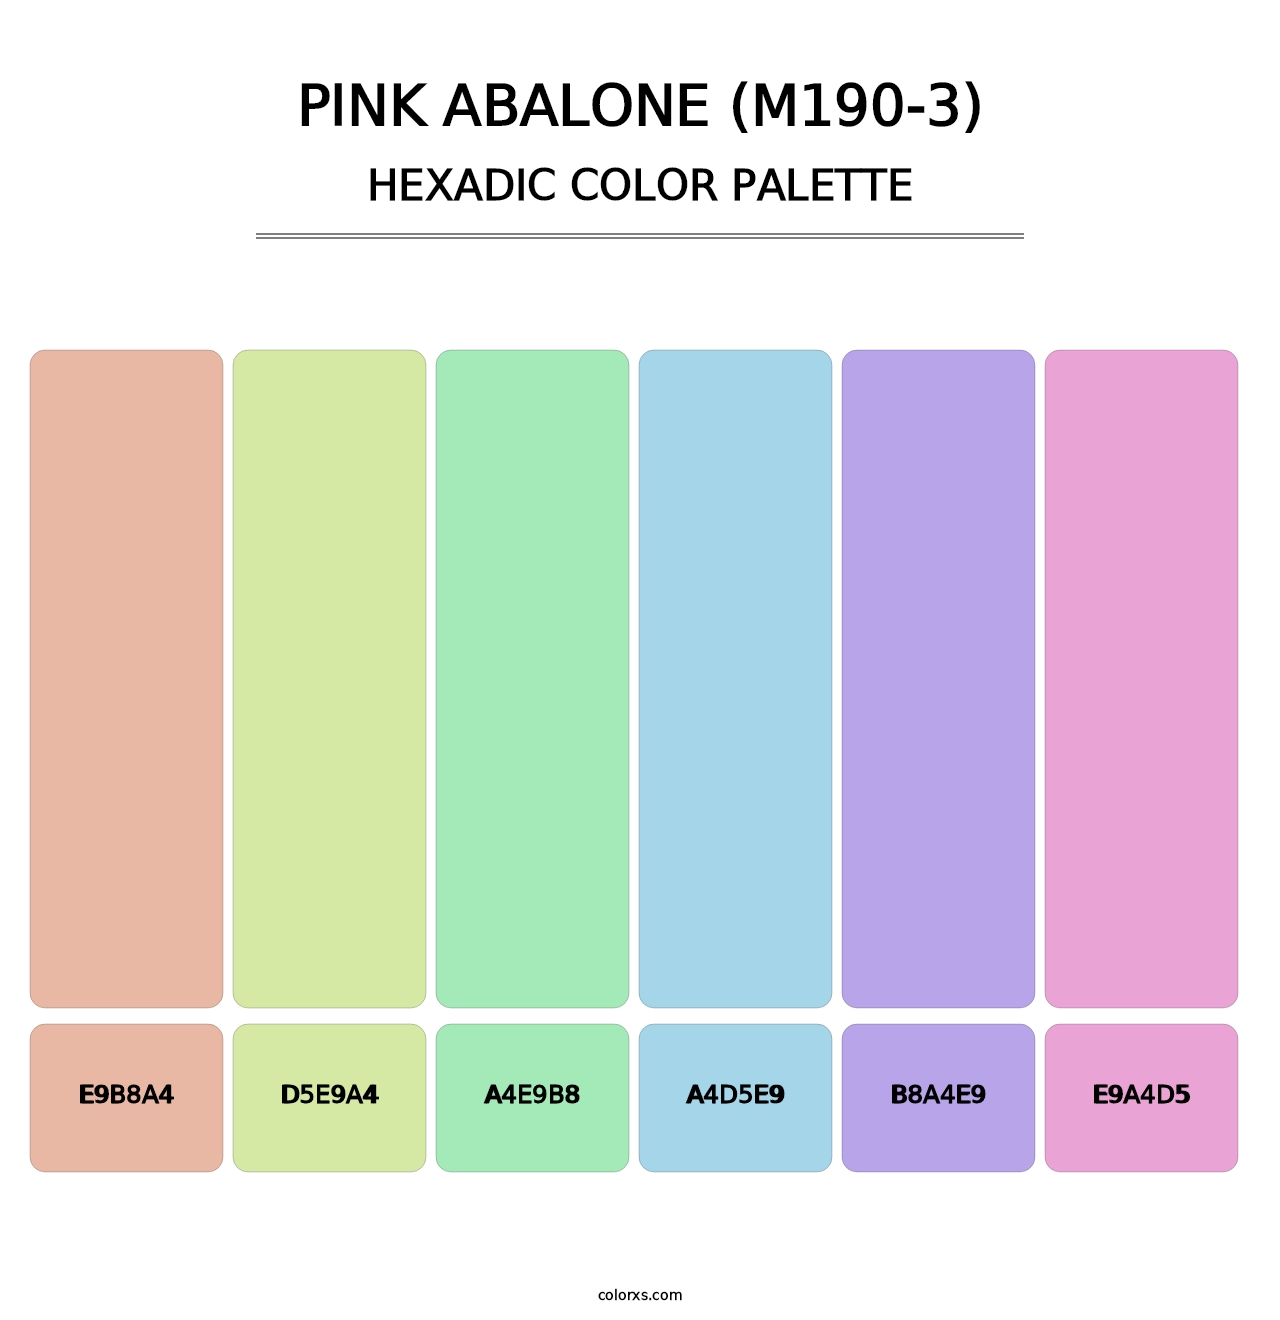 Pink Abalone (M190-3) - Hexadic Color Palette